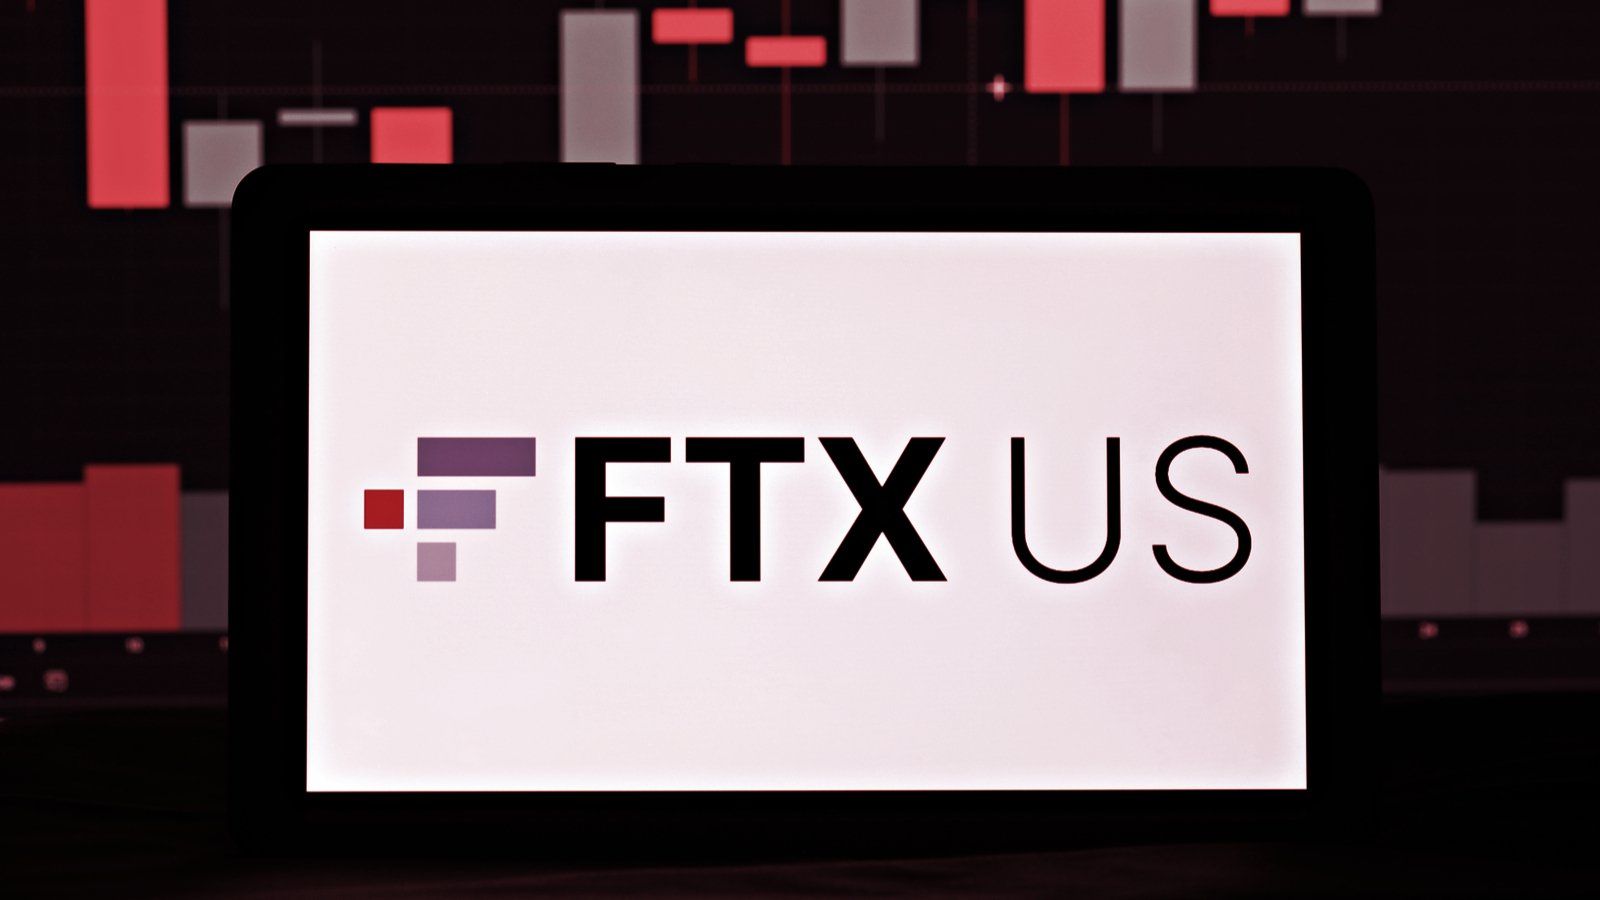 FTX US Derivatives CEO: Funds Are Safe, Business 'Almost Entirely Separate'